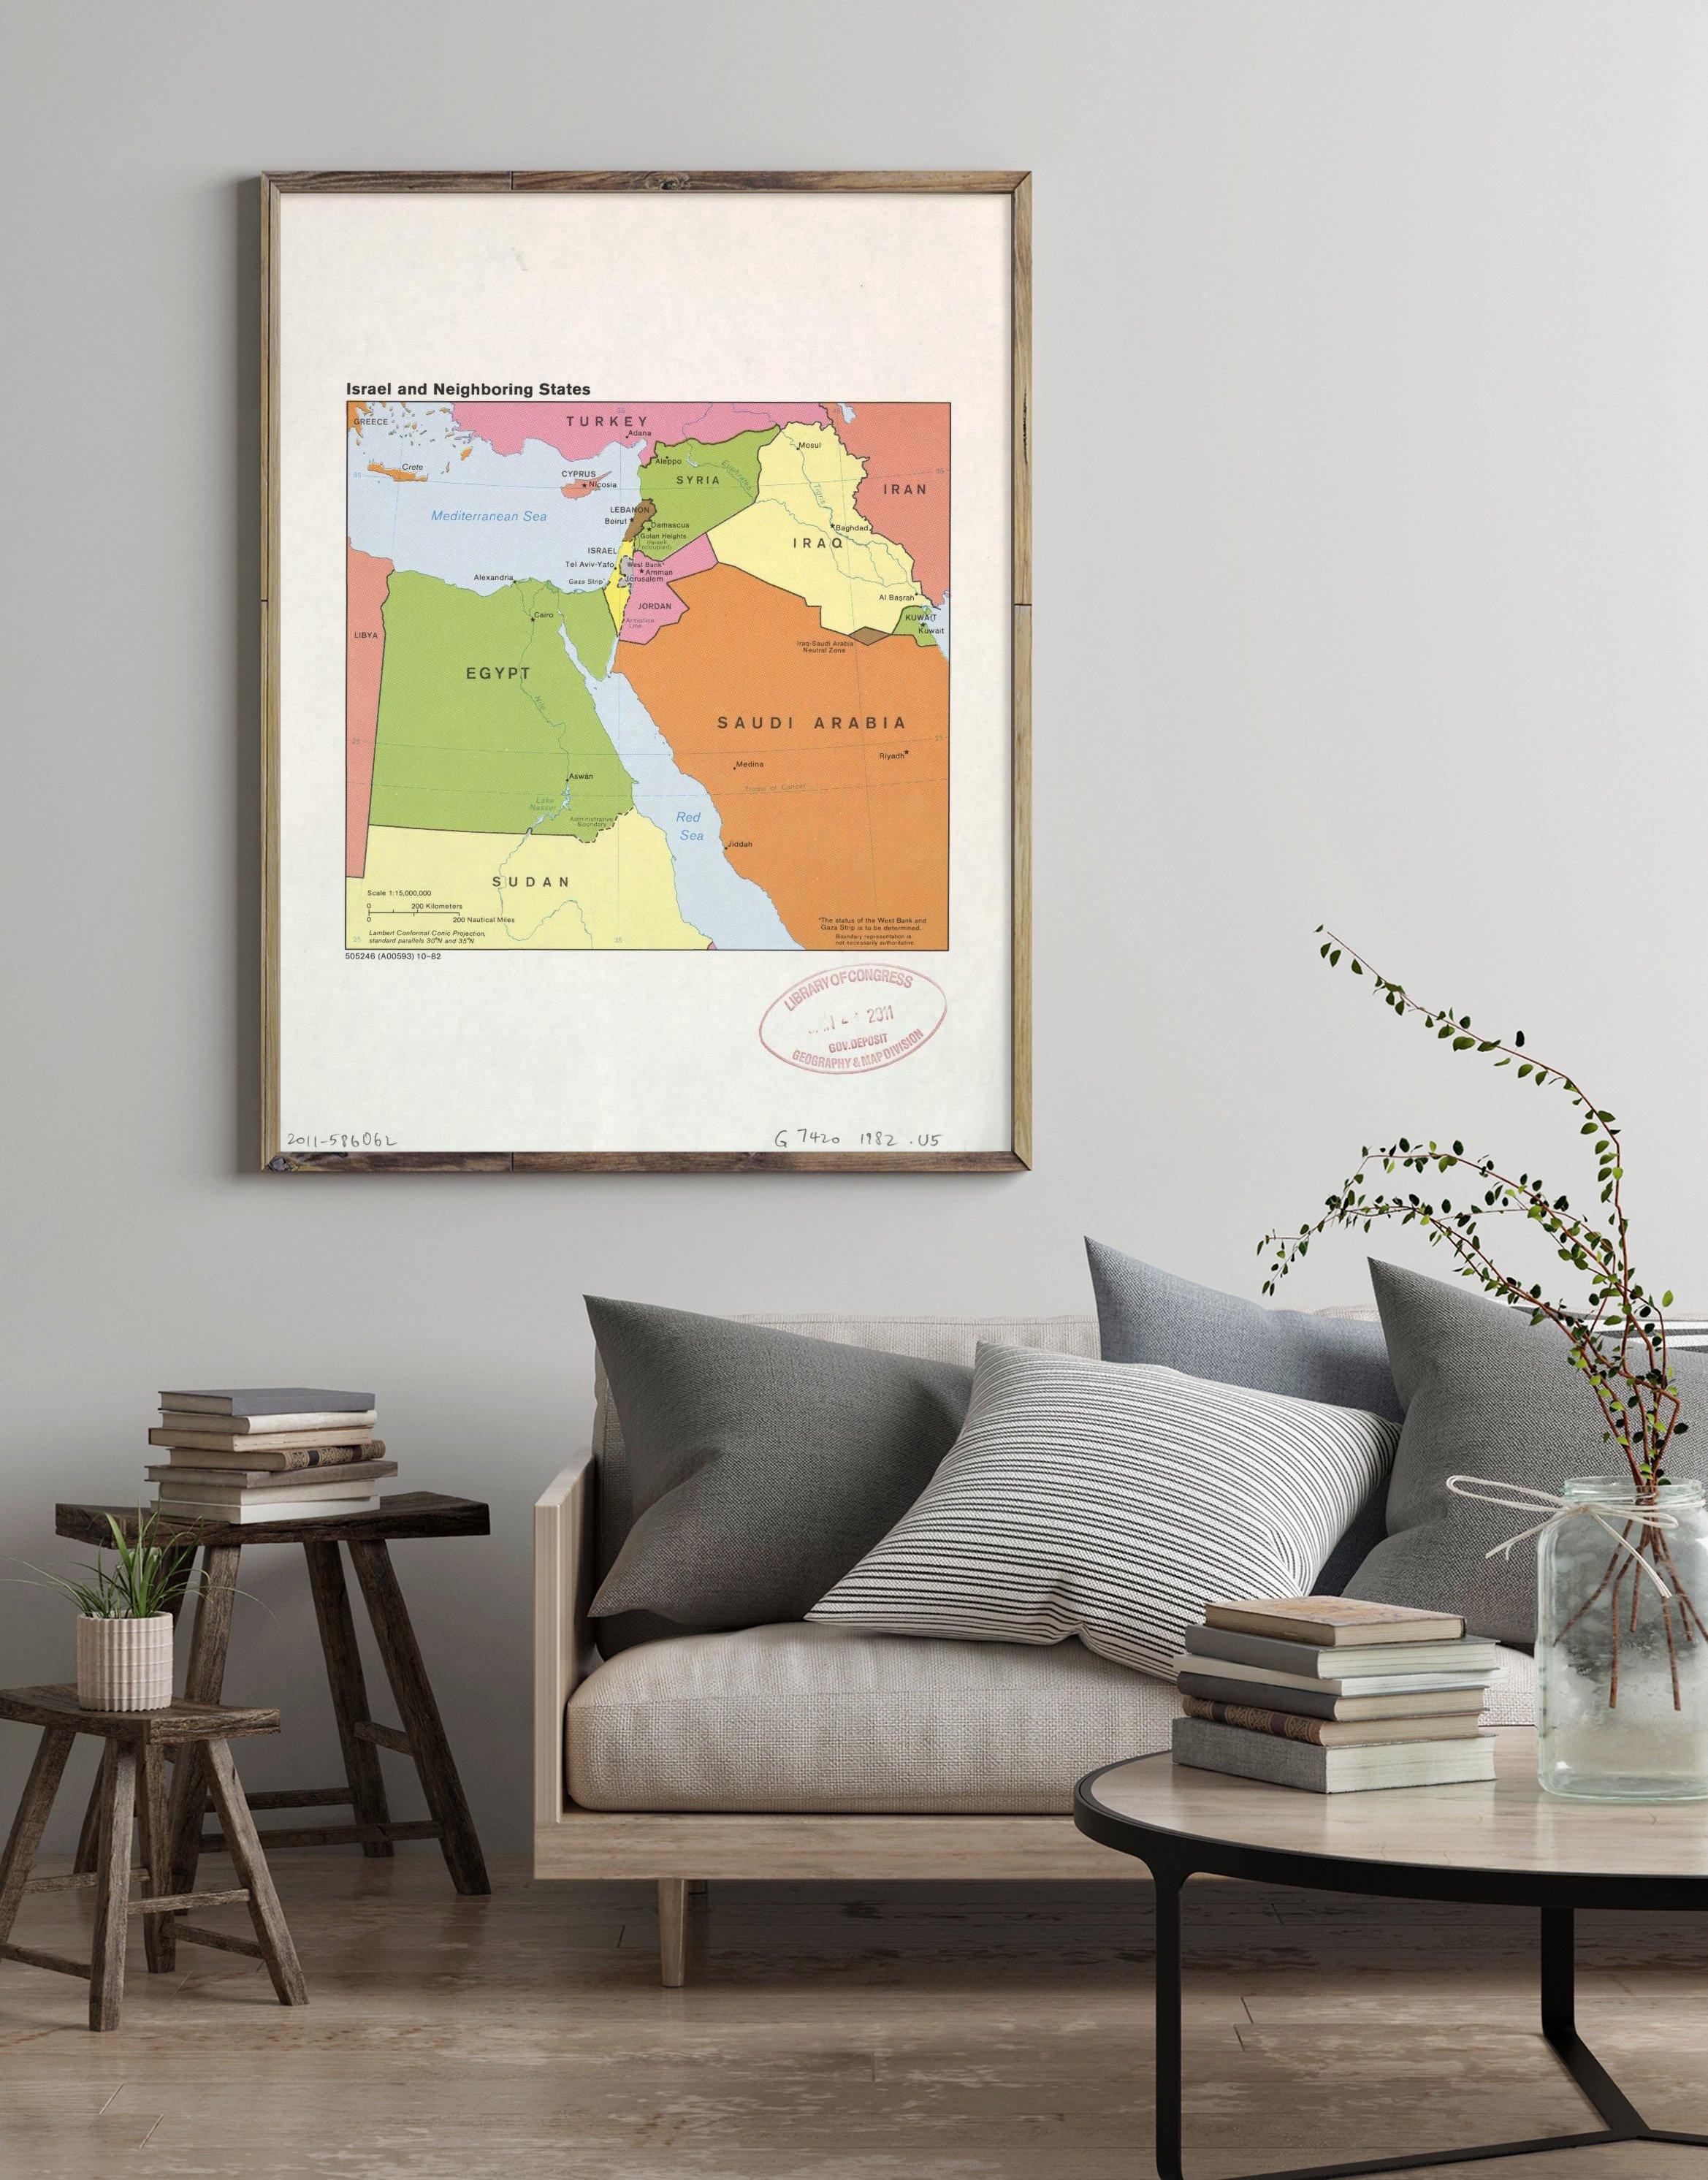 1982 Map| Israel and neighboring states| Middle East Map Size: 18 inch - New York Map Company